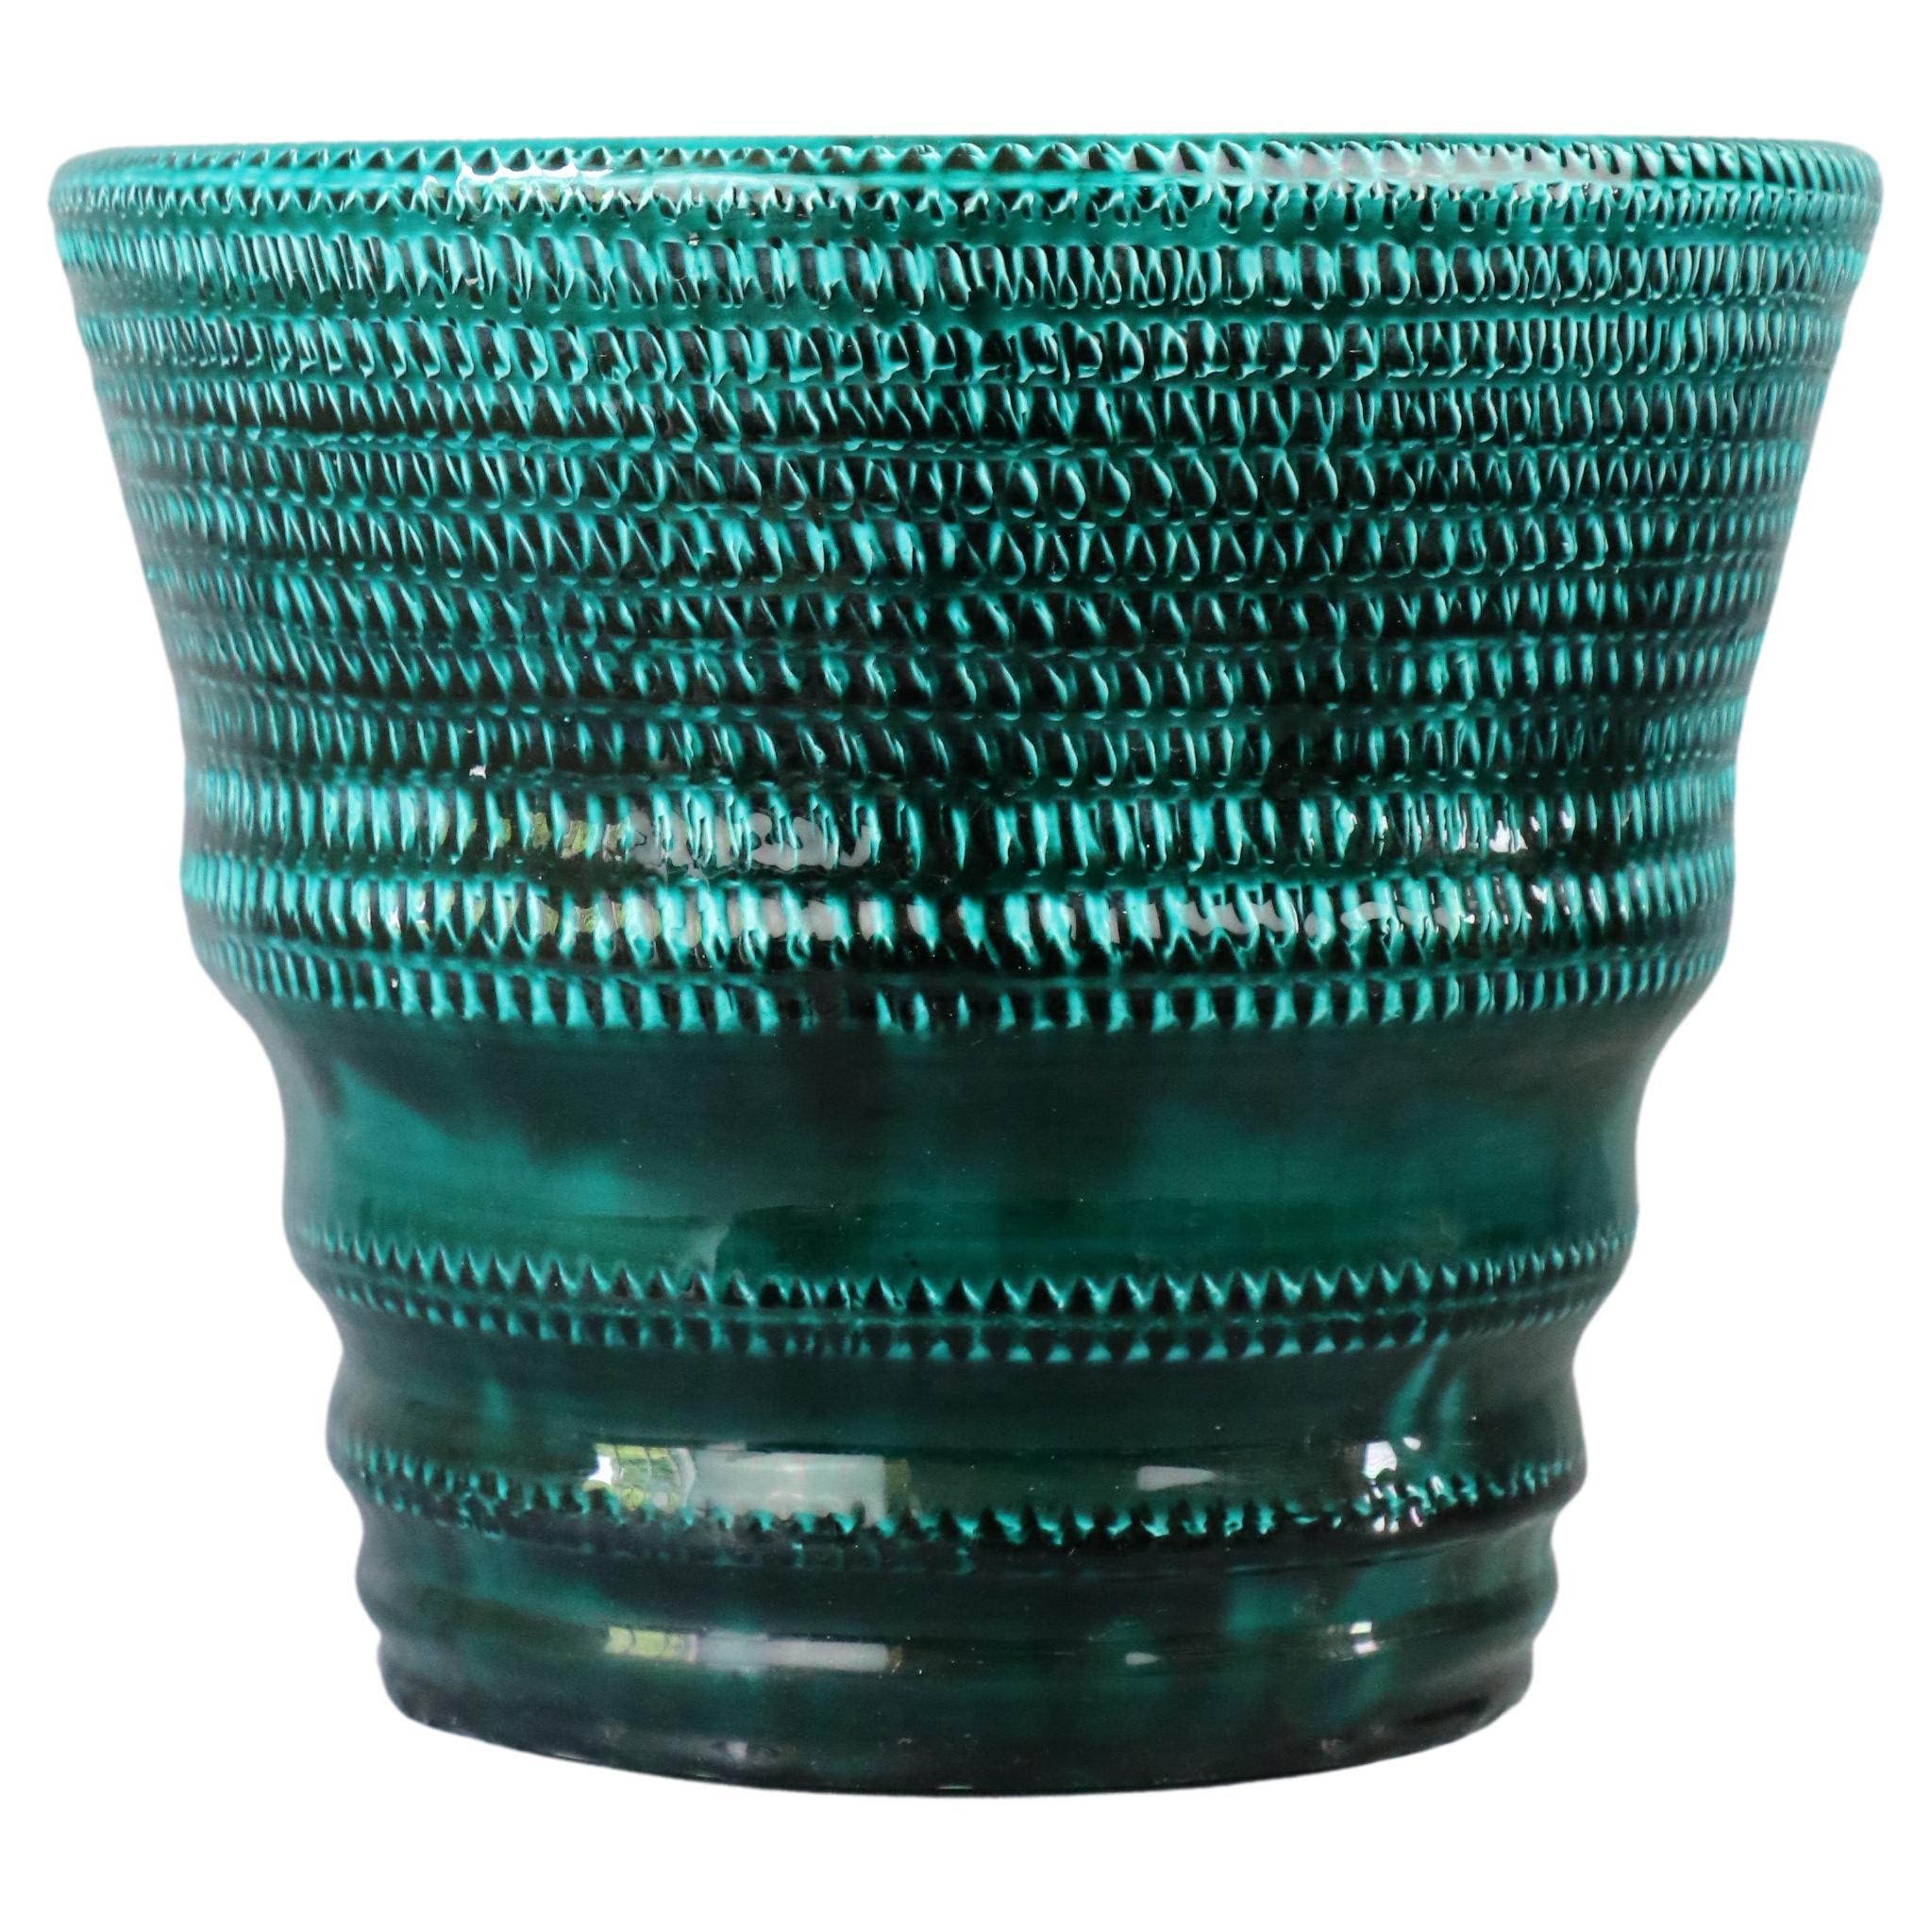 Large green glazed ceramic horn vase by Accolay - 1960 - French ceramics For Sale